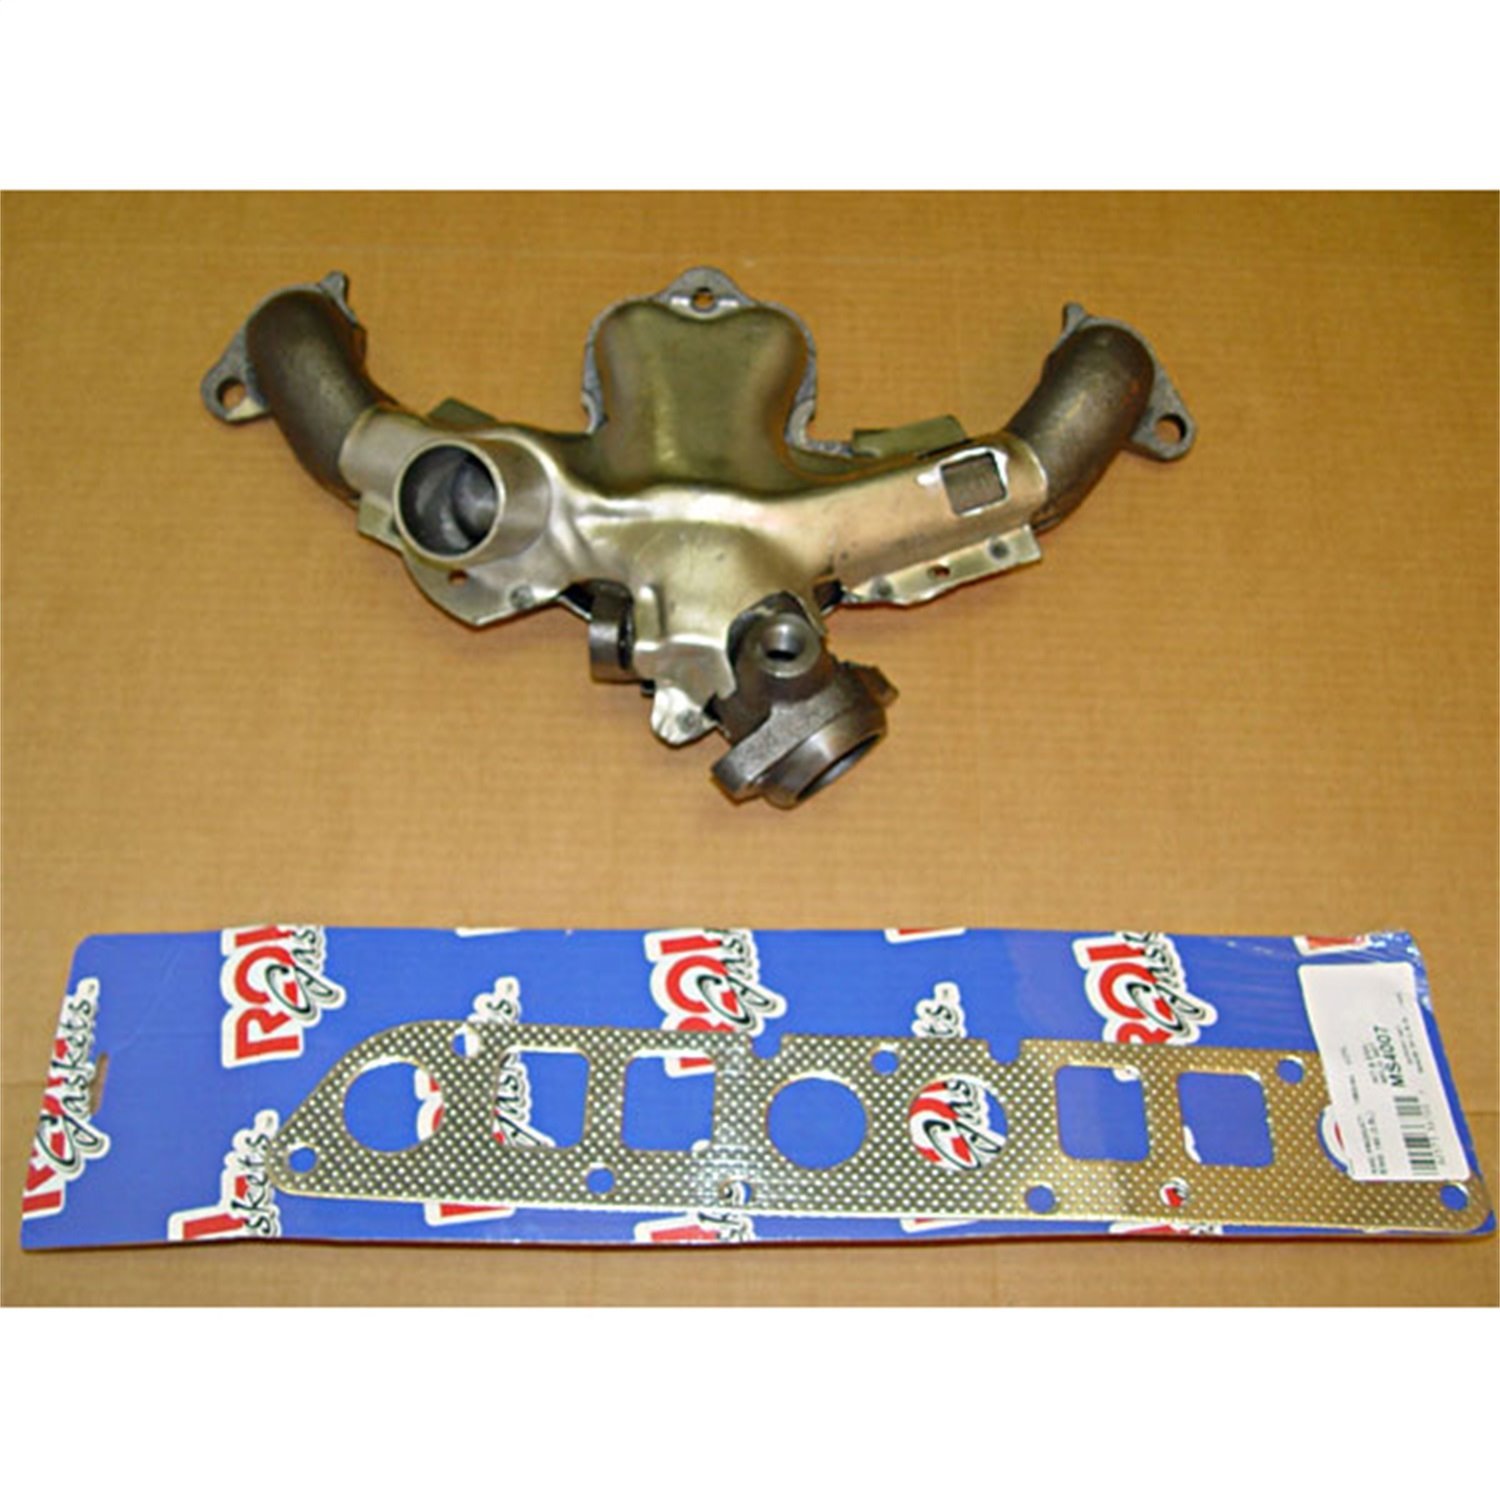 Replacement exhaust manifold kit from Omix-ADA, Fits 84-90 Jeep models with a 2.5 liter engine.